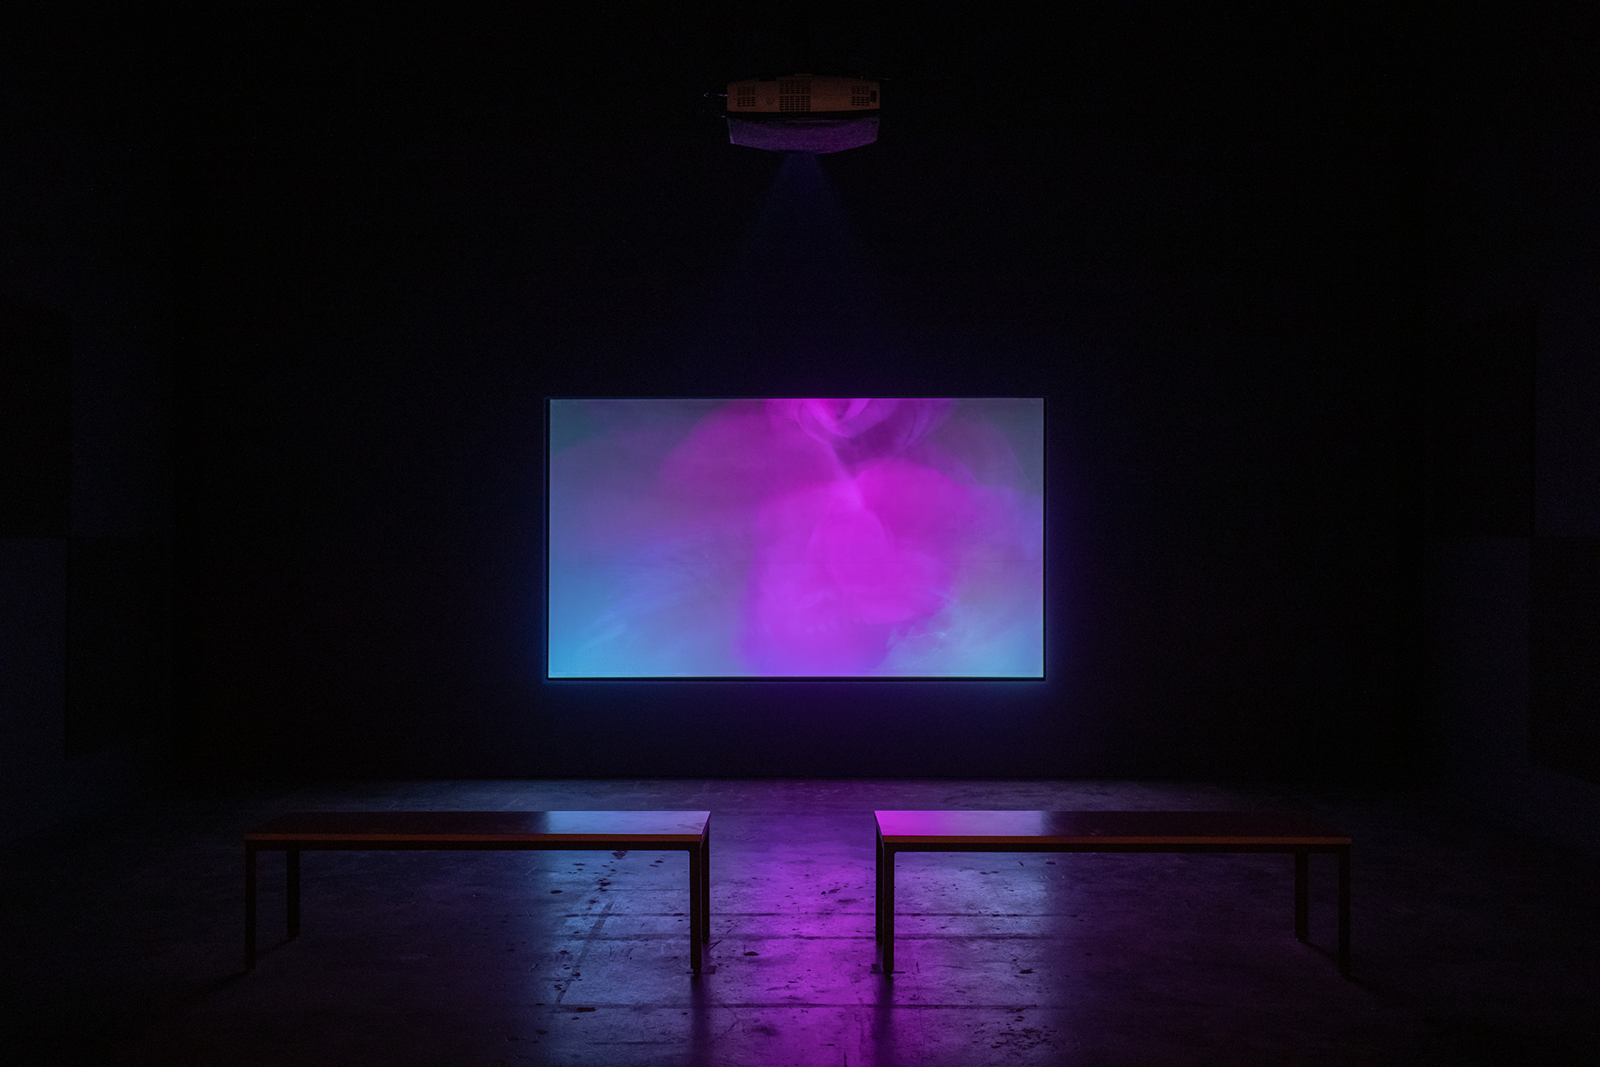 Dark room with a large video projection showing a purple and blueish abstract shape with two empty benches in the foreground